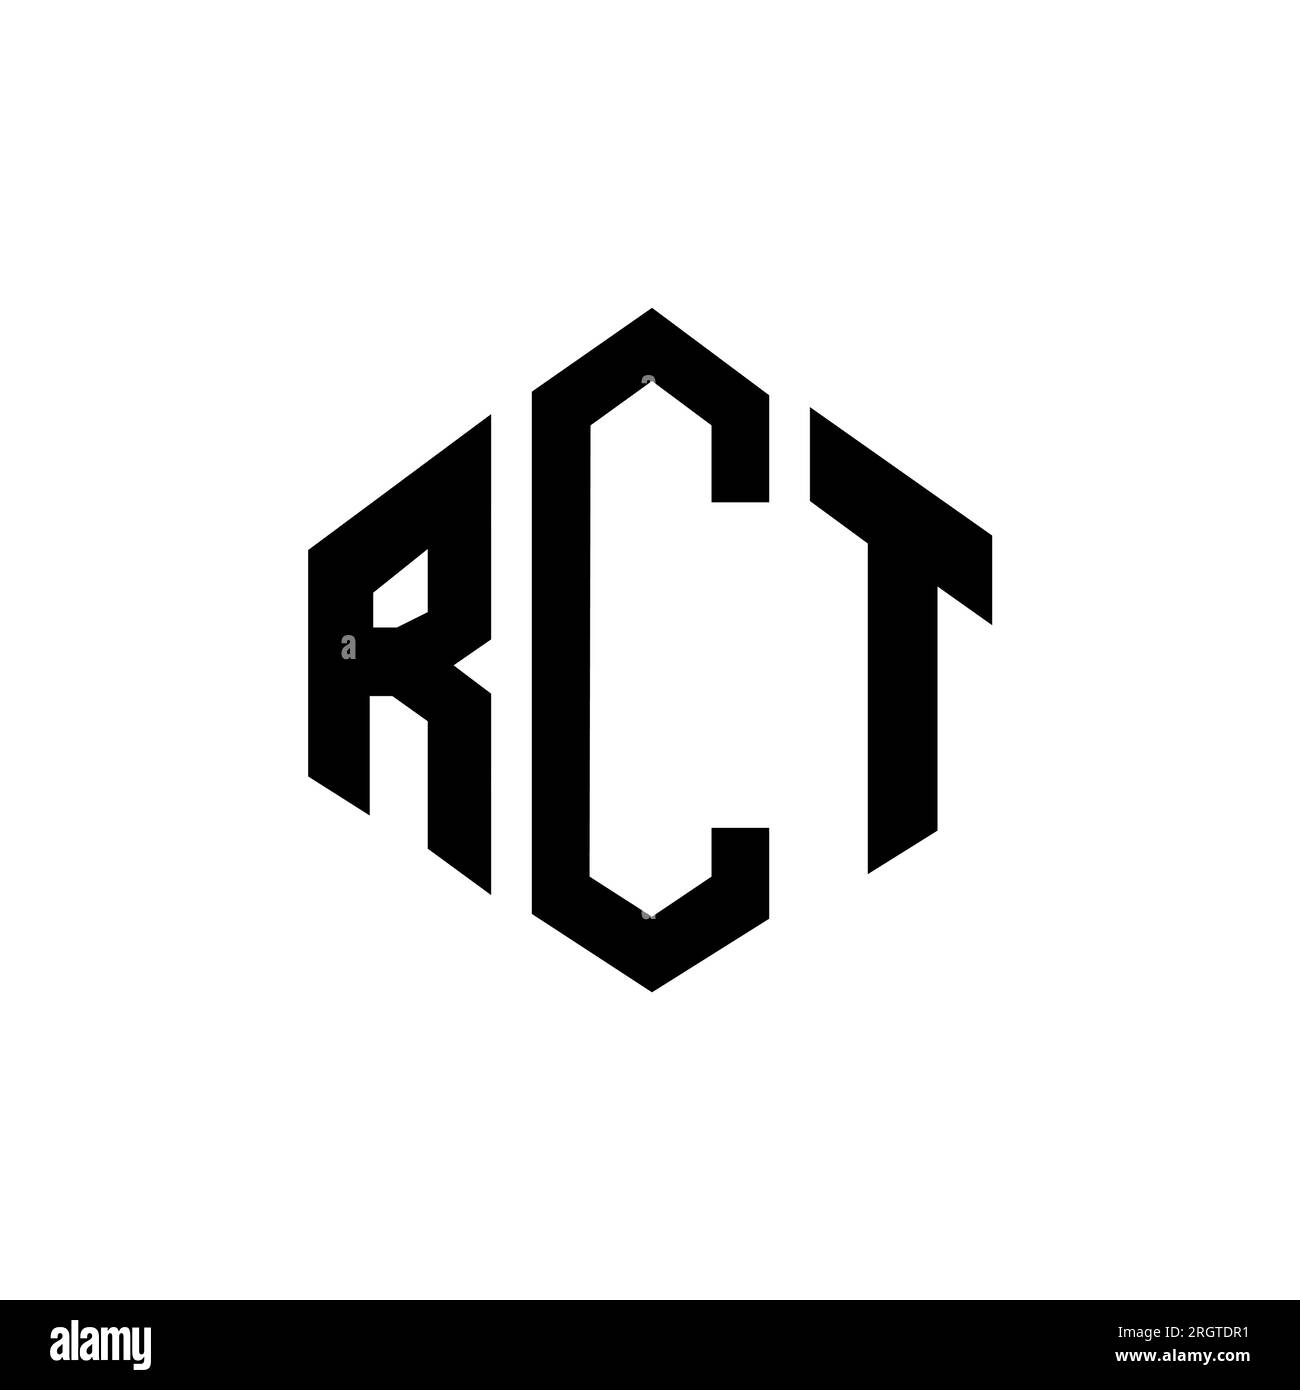 RCT letter logo design with polygon shape. RCT polygon and cube shape logo design. RCT hexagon vector logo template white and black colors. RCT monogr Stock Vector